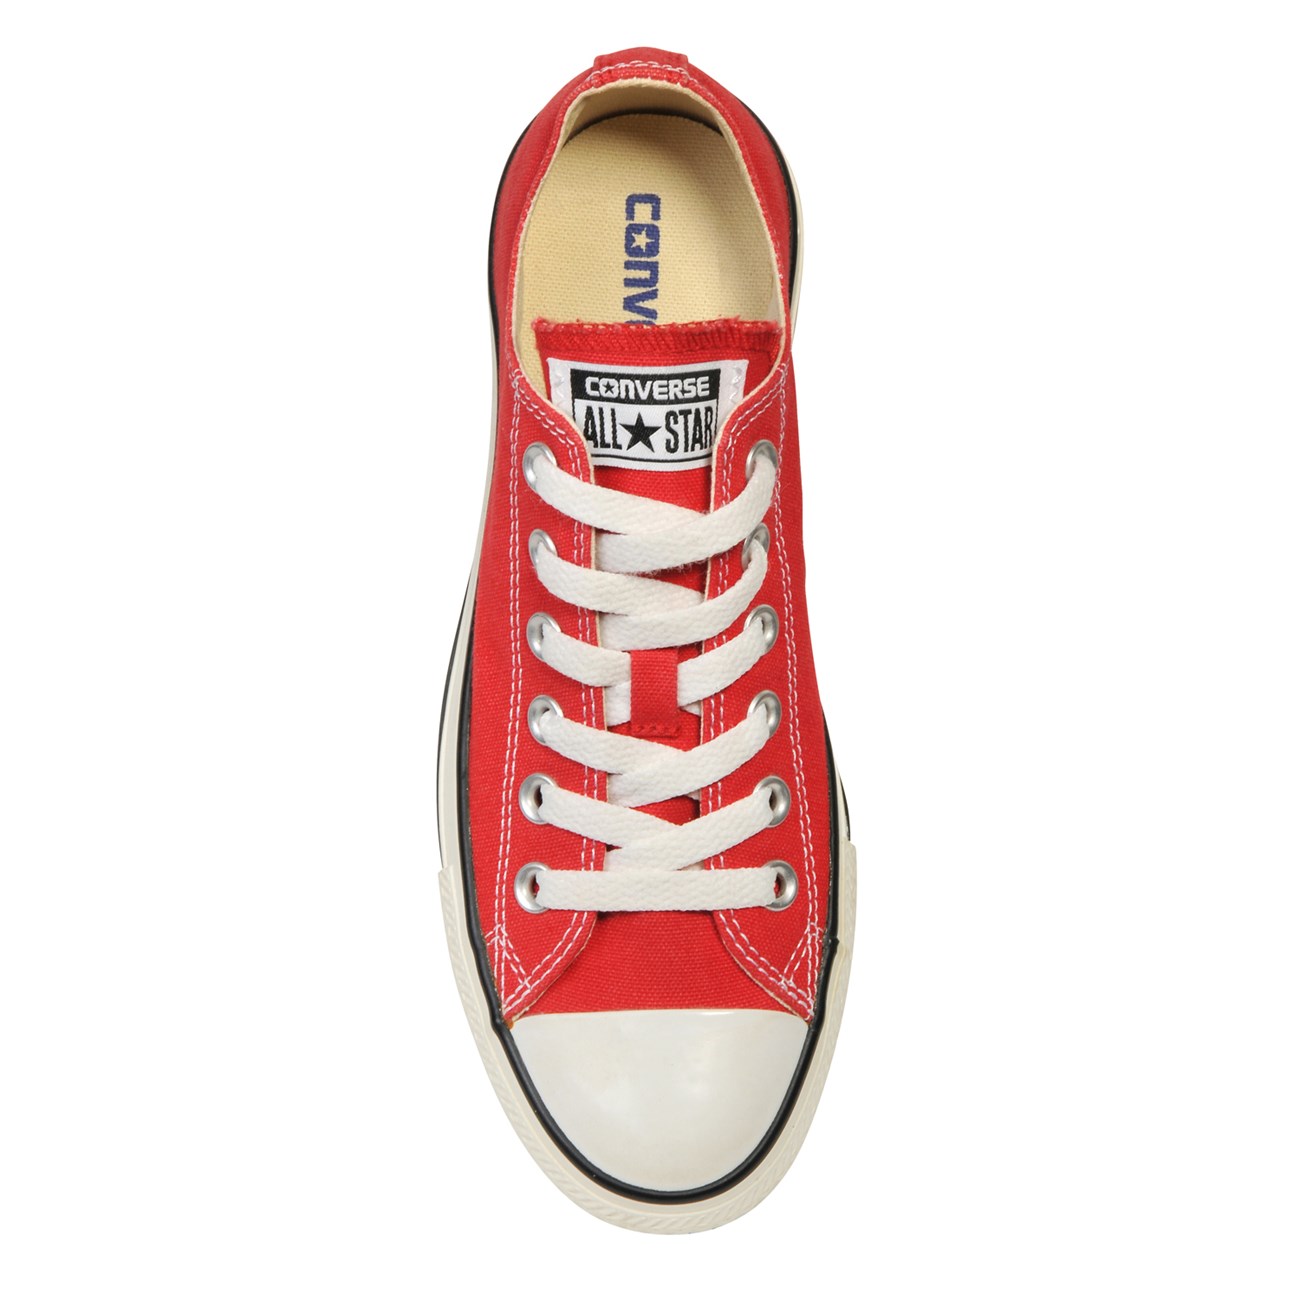 CONVERSE Unisex Sneakers All Star Low M9696 - The Athlete's Foot